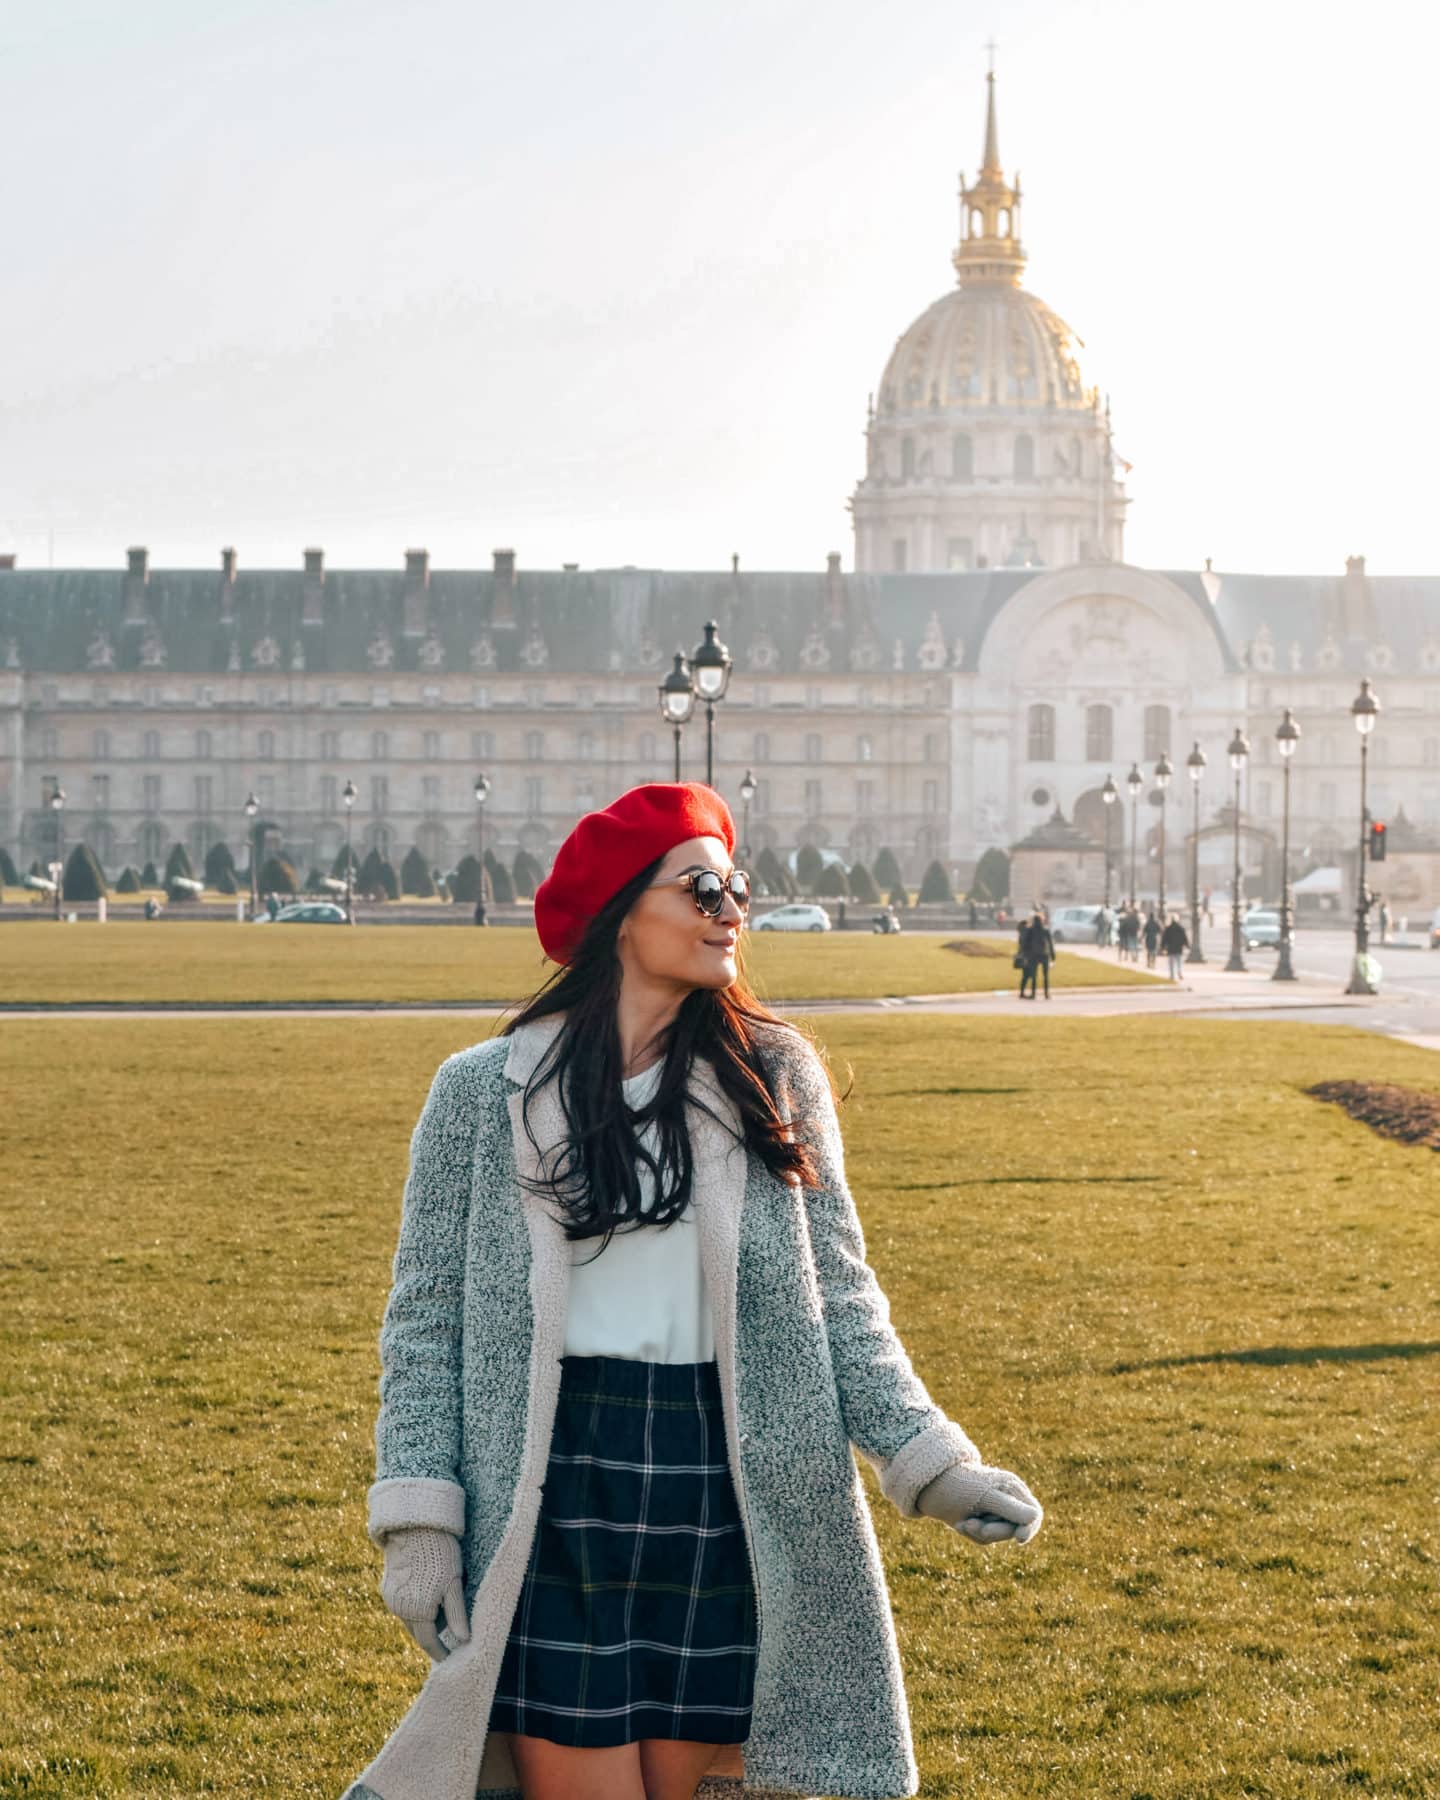 Paris Winter Fashion Guide Tips On What To Wear When It S Cold Out